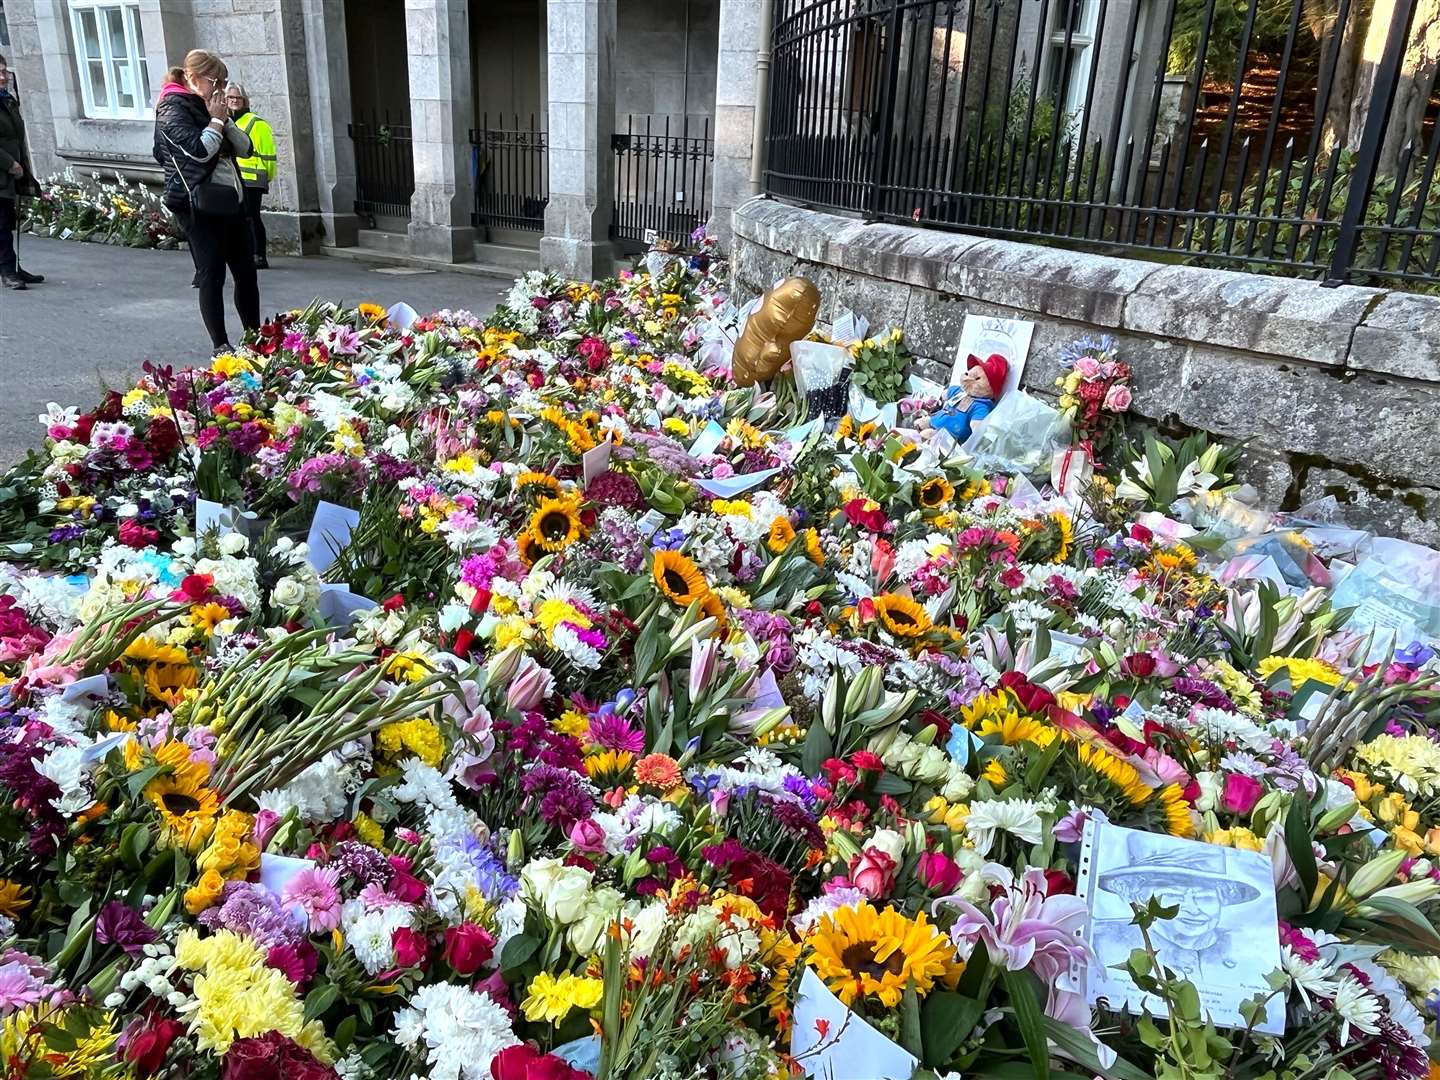 Bouquets of flowers have been laid outside Balmoral Castle, where the Queen died (Tom Wilkinson/PA)